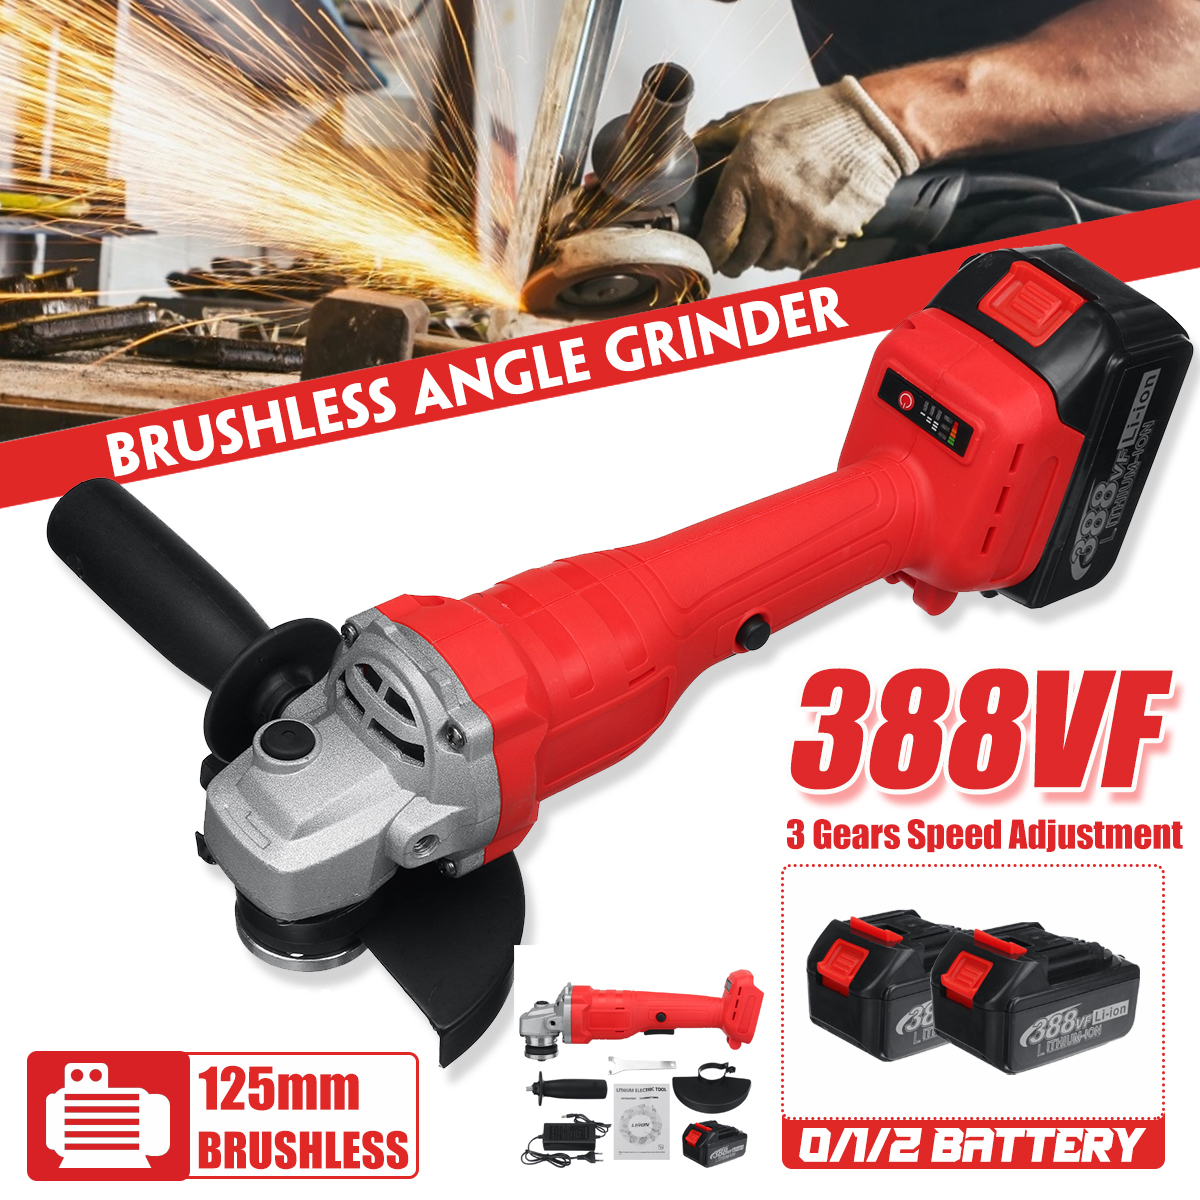 388VF-125MM-1500W-Cordless-Brushless-Angle-Grinder-Electric-Polisher-W-None12-Battery-Cutting-Sand-D-1879534-2